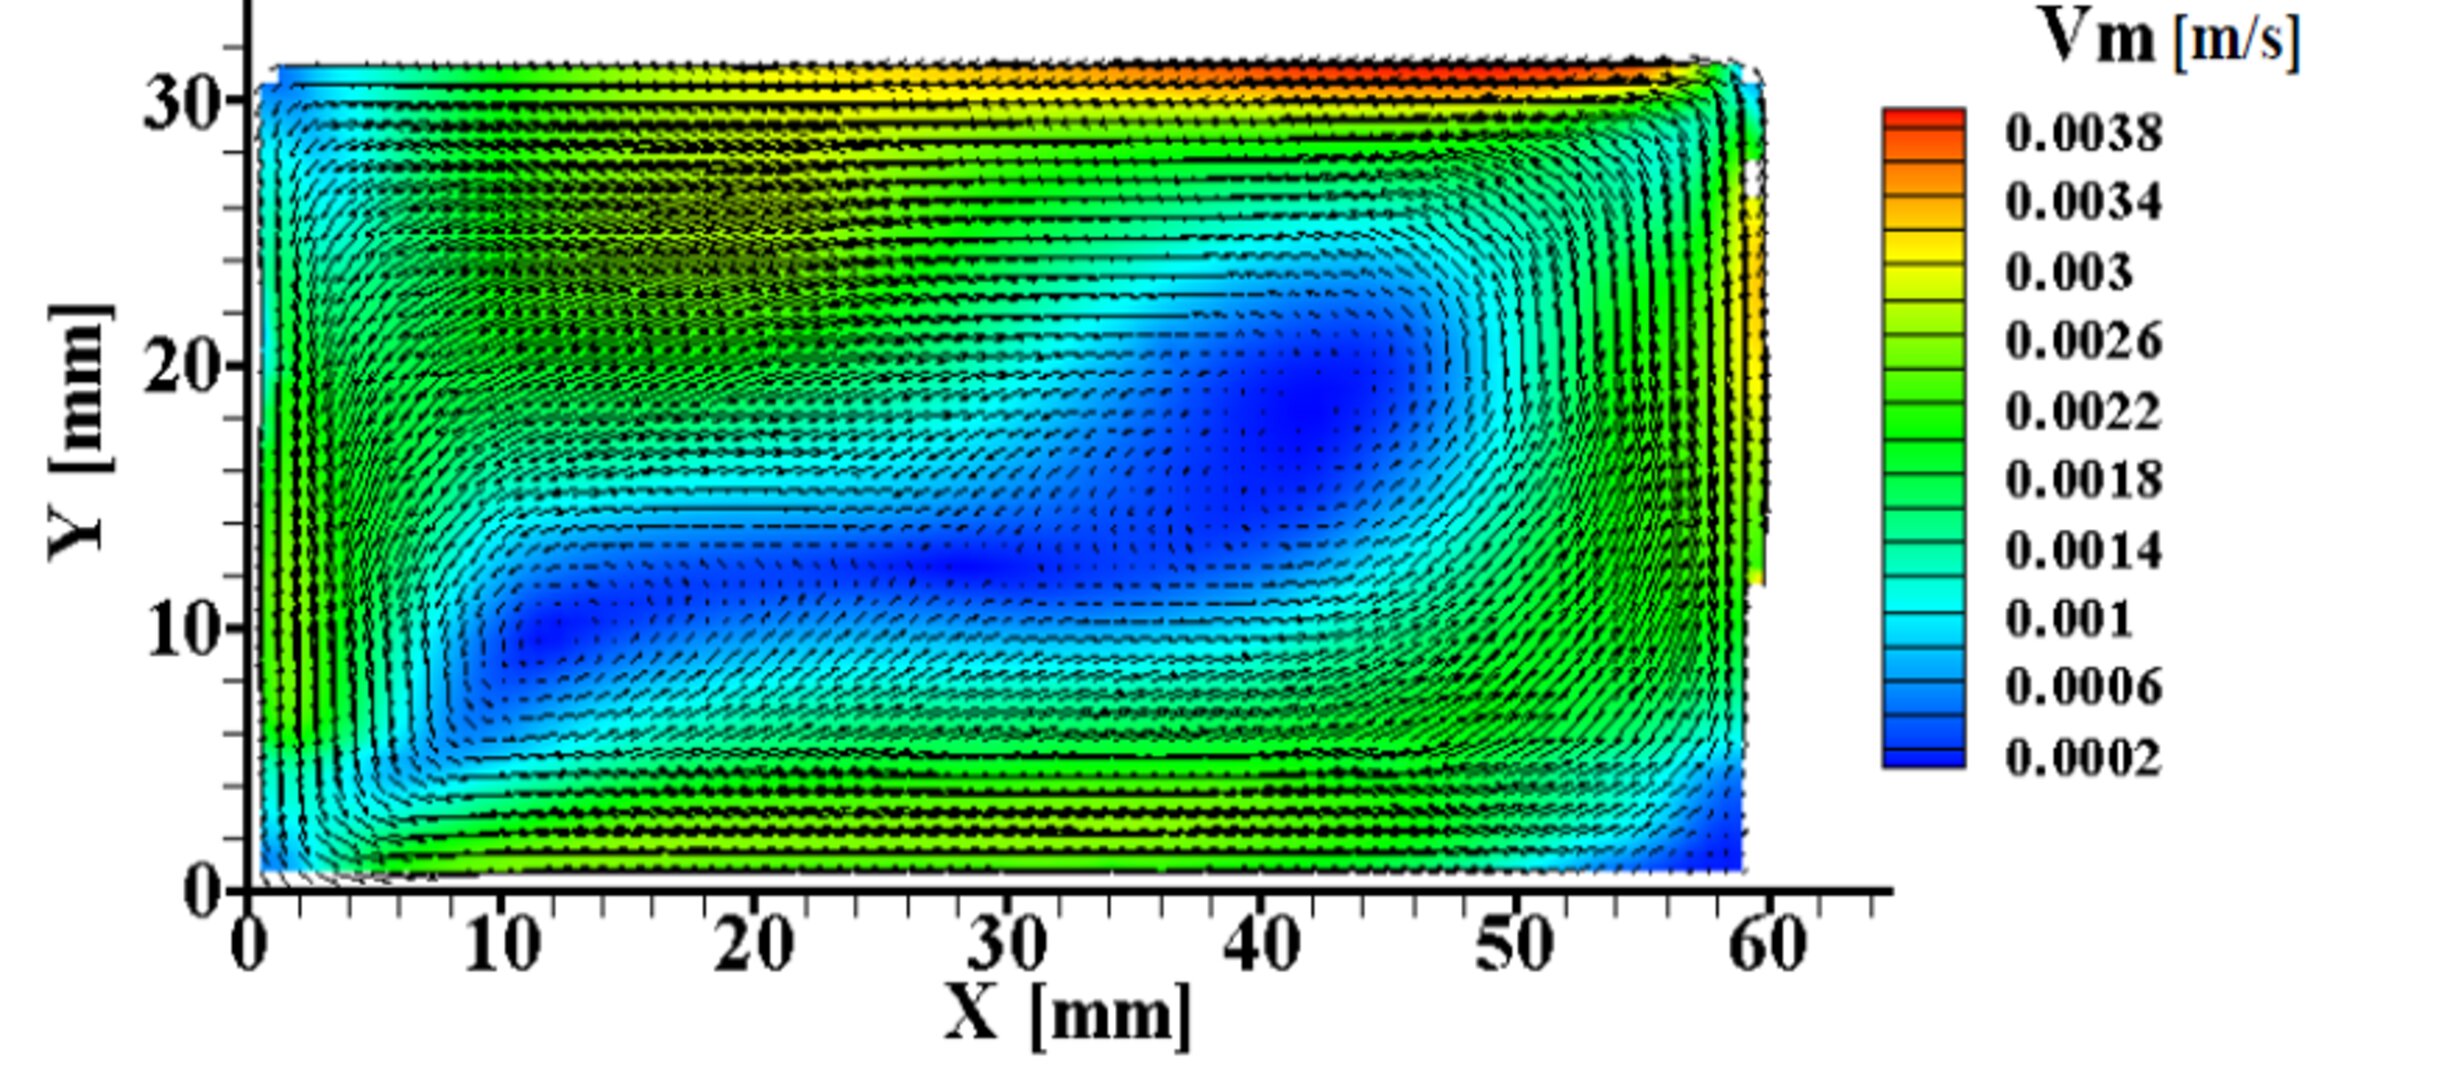 Thermal stratification in LN2_mean velocity field measured by cryogenic PIV tech